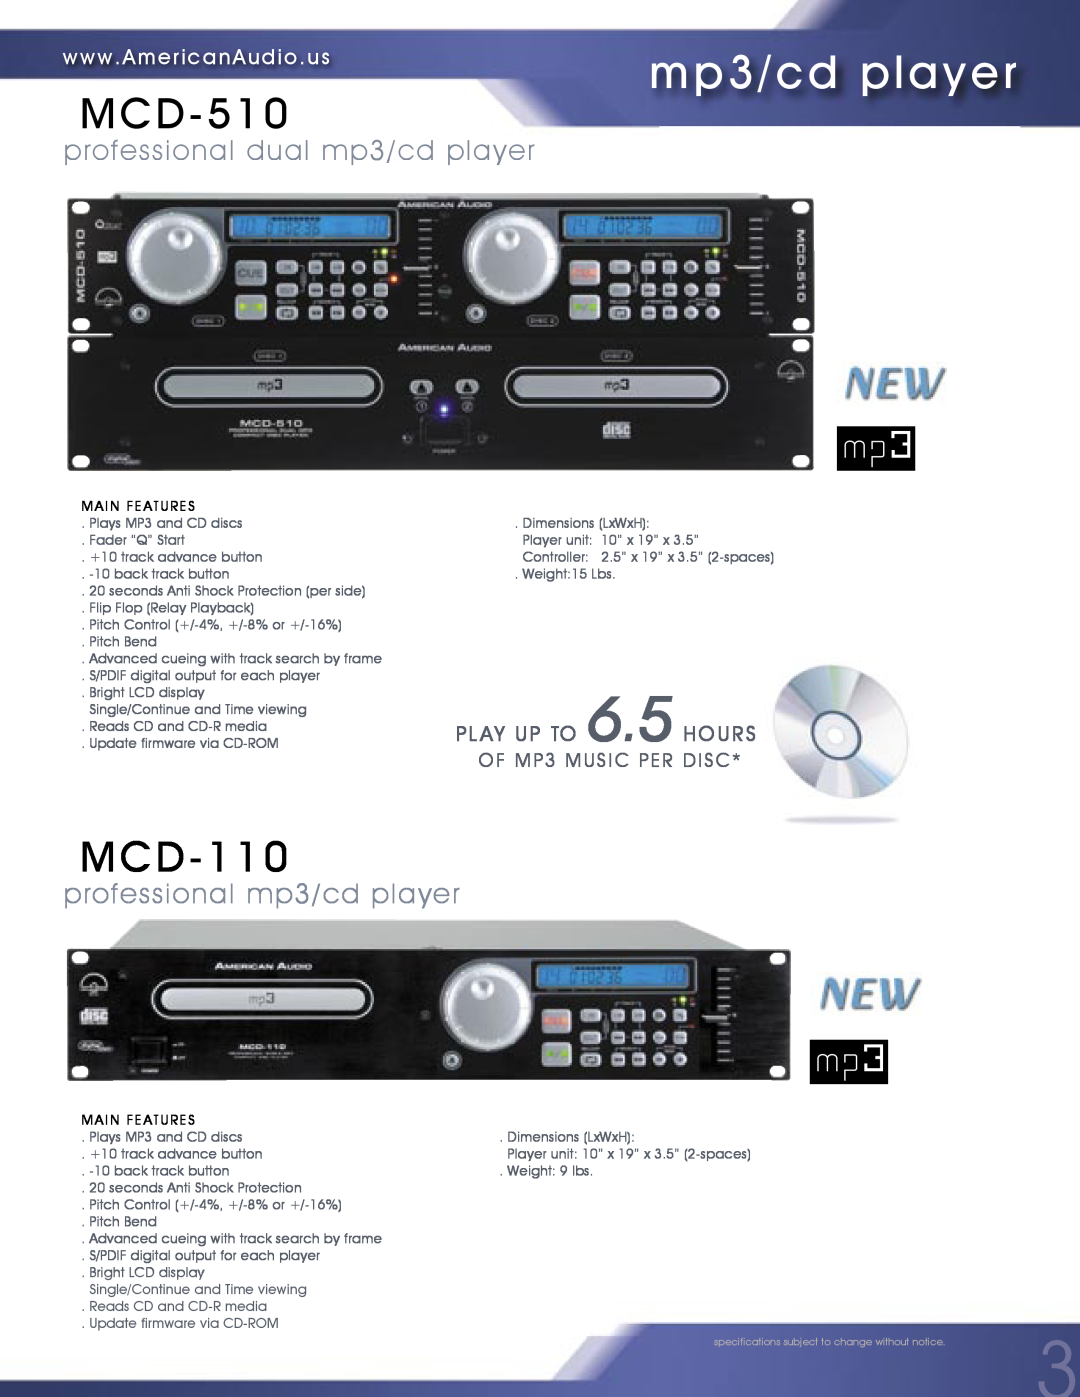 American Audio MCD-810 manual MCD-510, MCD-110, professional mp3/cd player, PL AY UP TO 6.5 HOURS, OF MP3 MUSIC PER DISC 